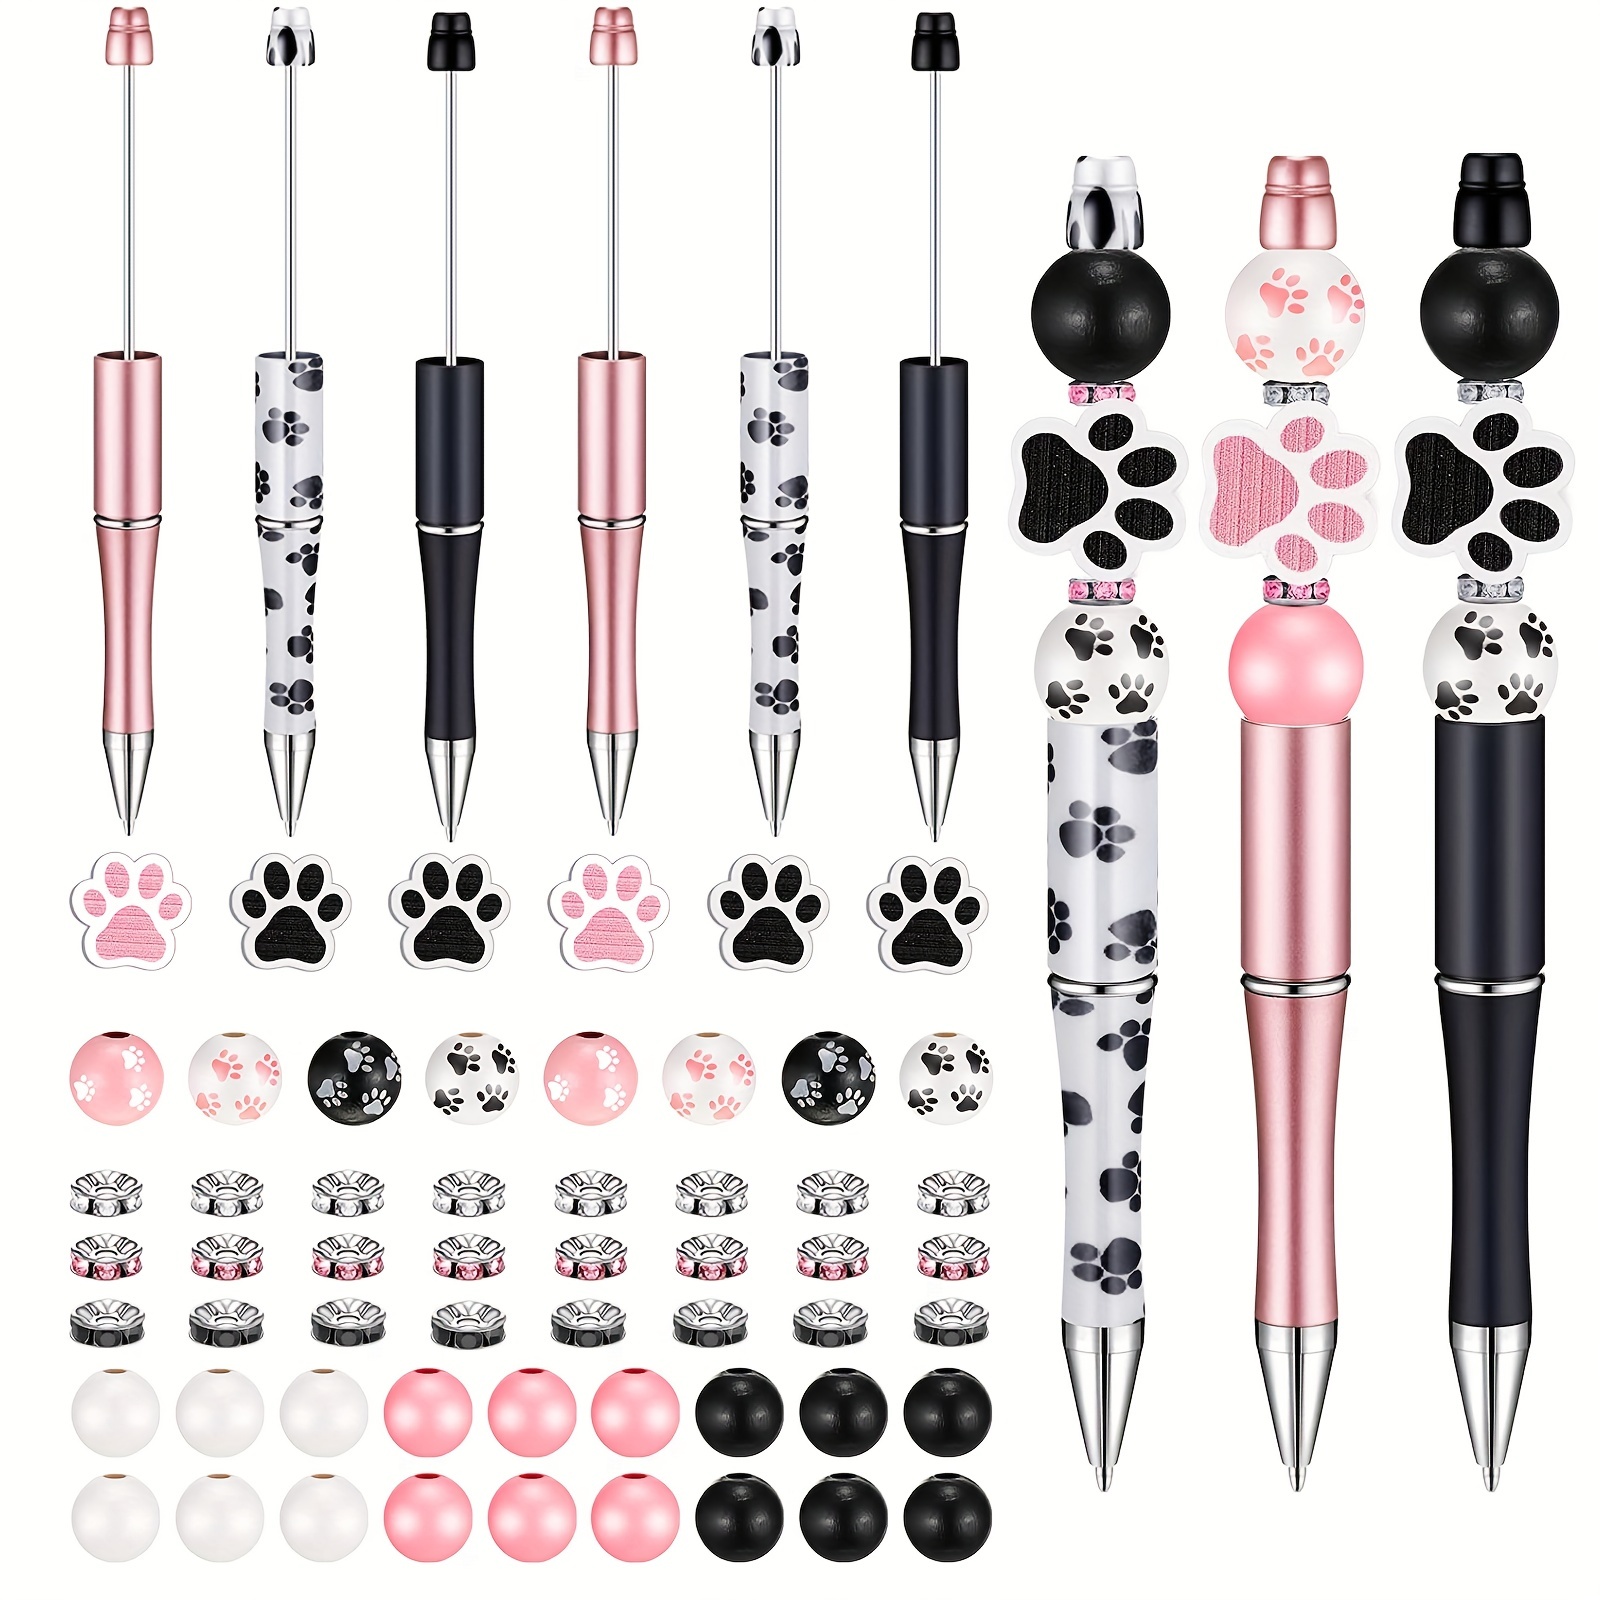 Planet Pens Dogs and Cats Novelty Pen Bundle 4 Pc Set - Unique Kids and  Adults Office Supplies Ballpoint Pen, Colorful Pets Writing Pen for Cool  Stationery School and Office Desk Accessories 